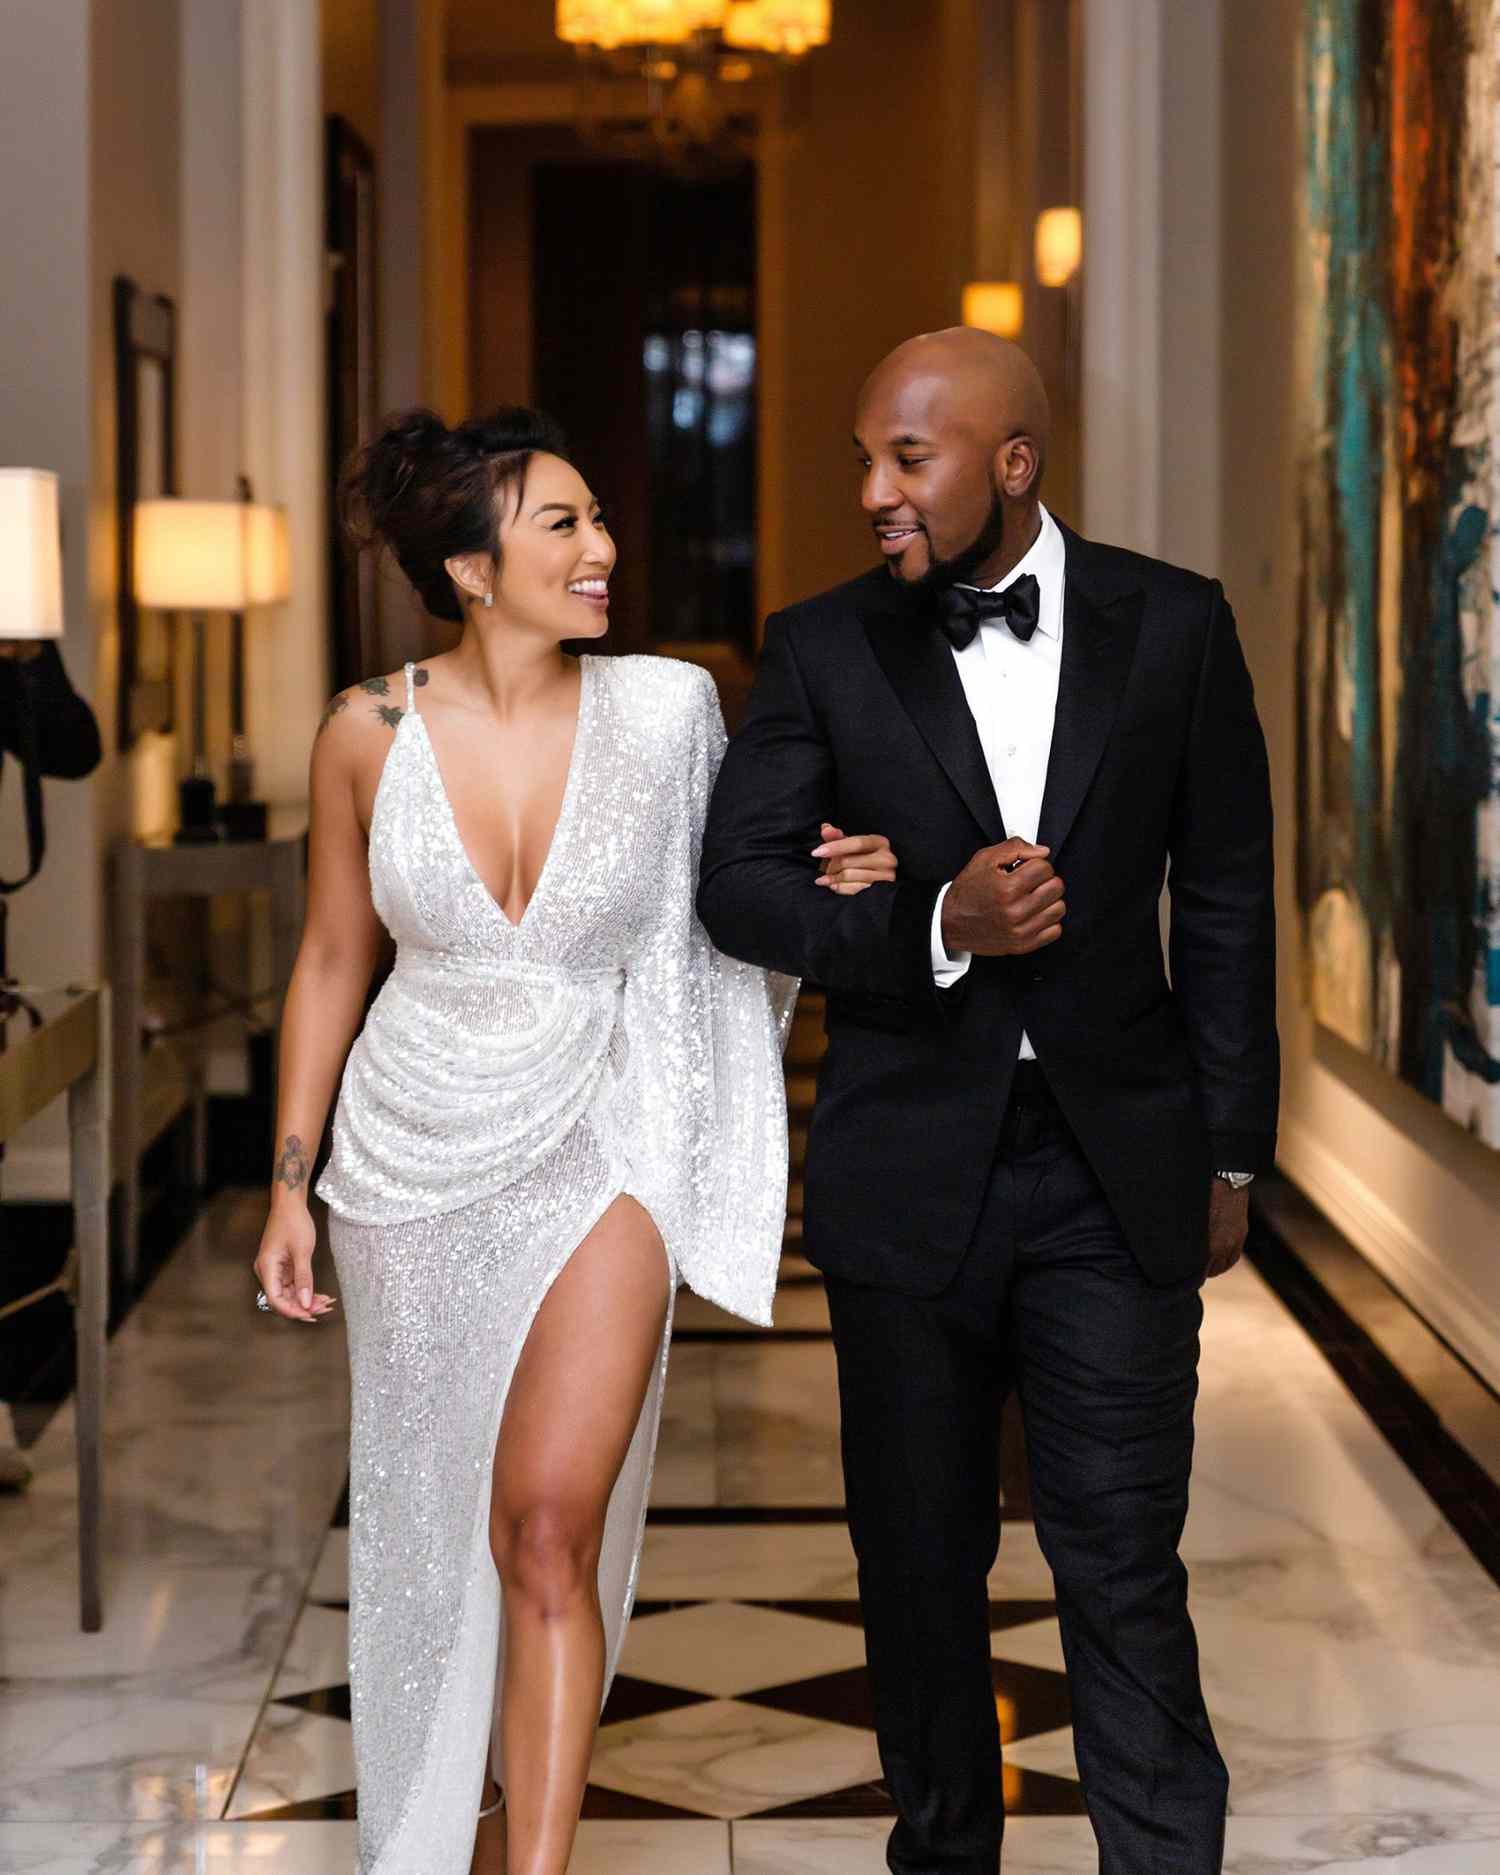 The Real's Jeannie Mai is Dating Rapper Jeezy